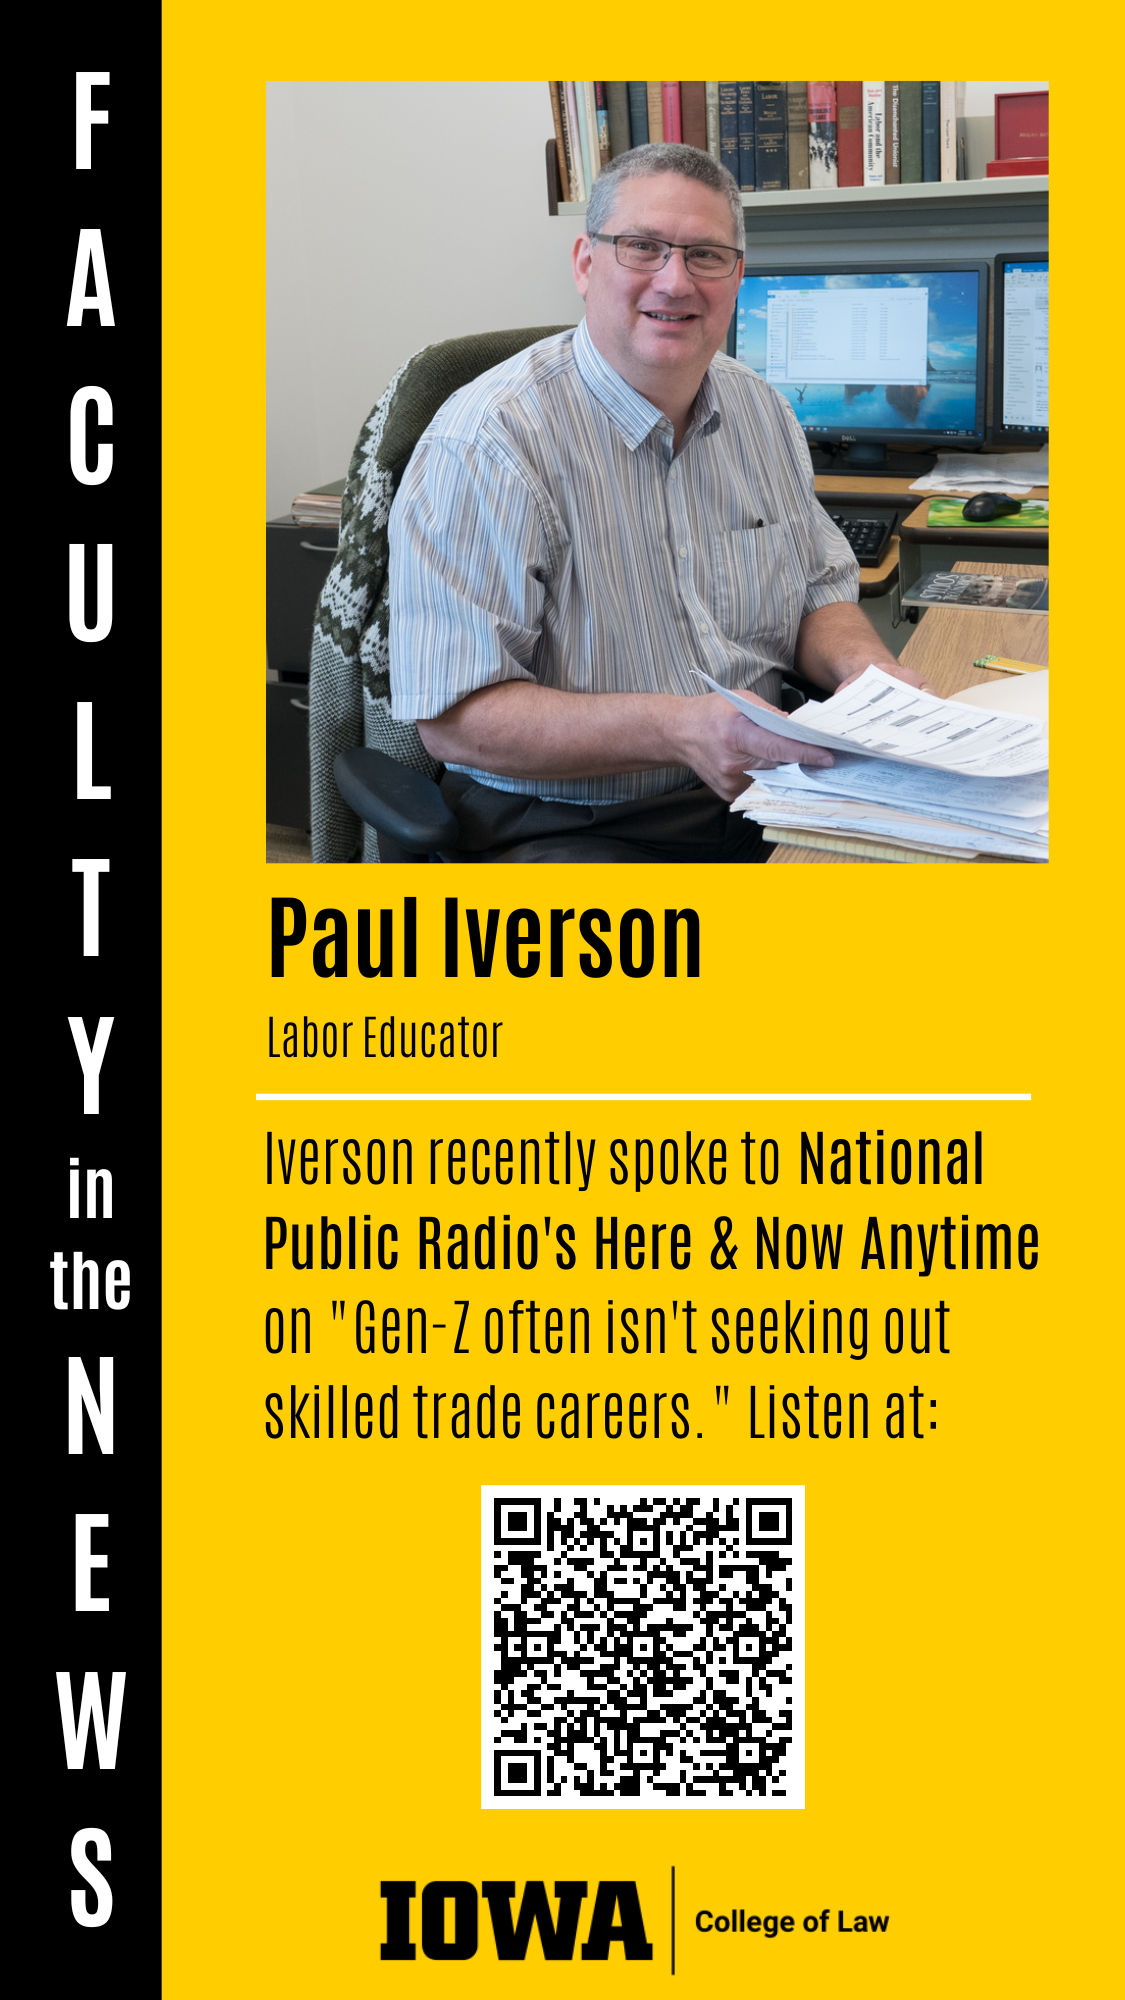 Paul Iverson Labor Educator Iverson recently spoke to National Public Radio's Here & Now Anytime on "Gen-Z often isn't seeking out skilled trade careers." Listen at: